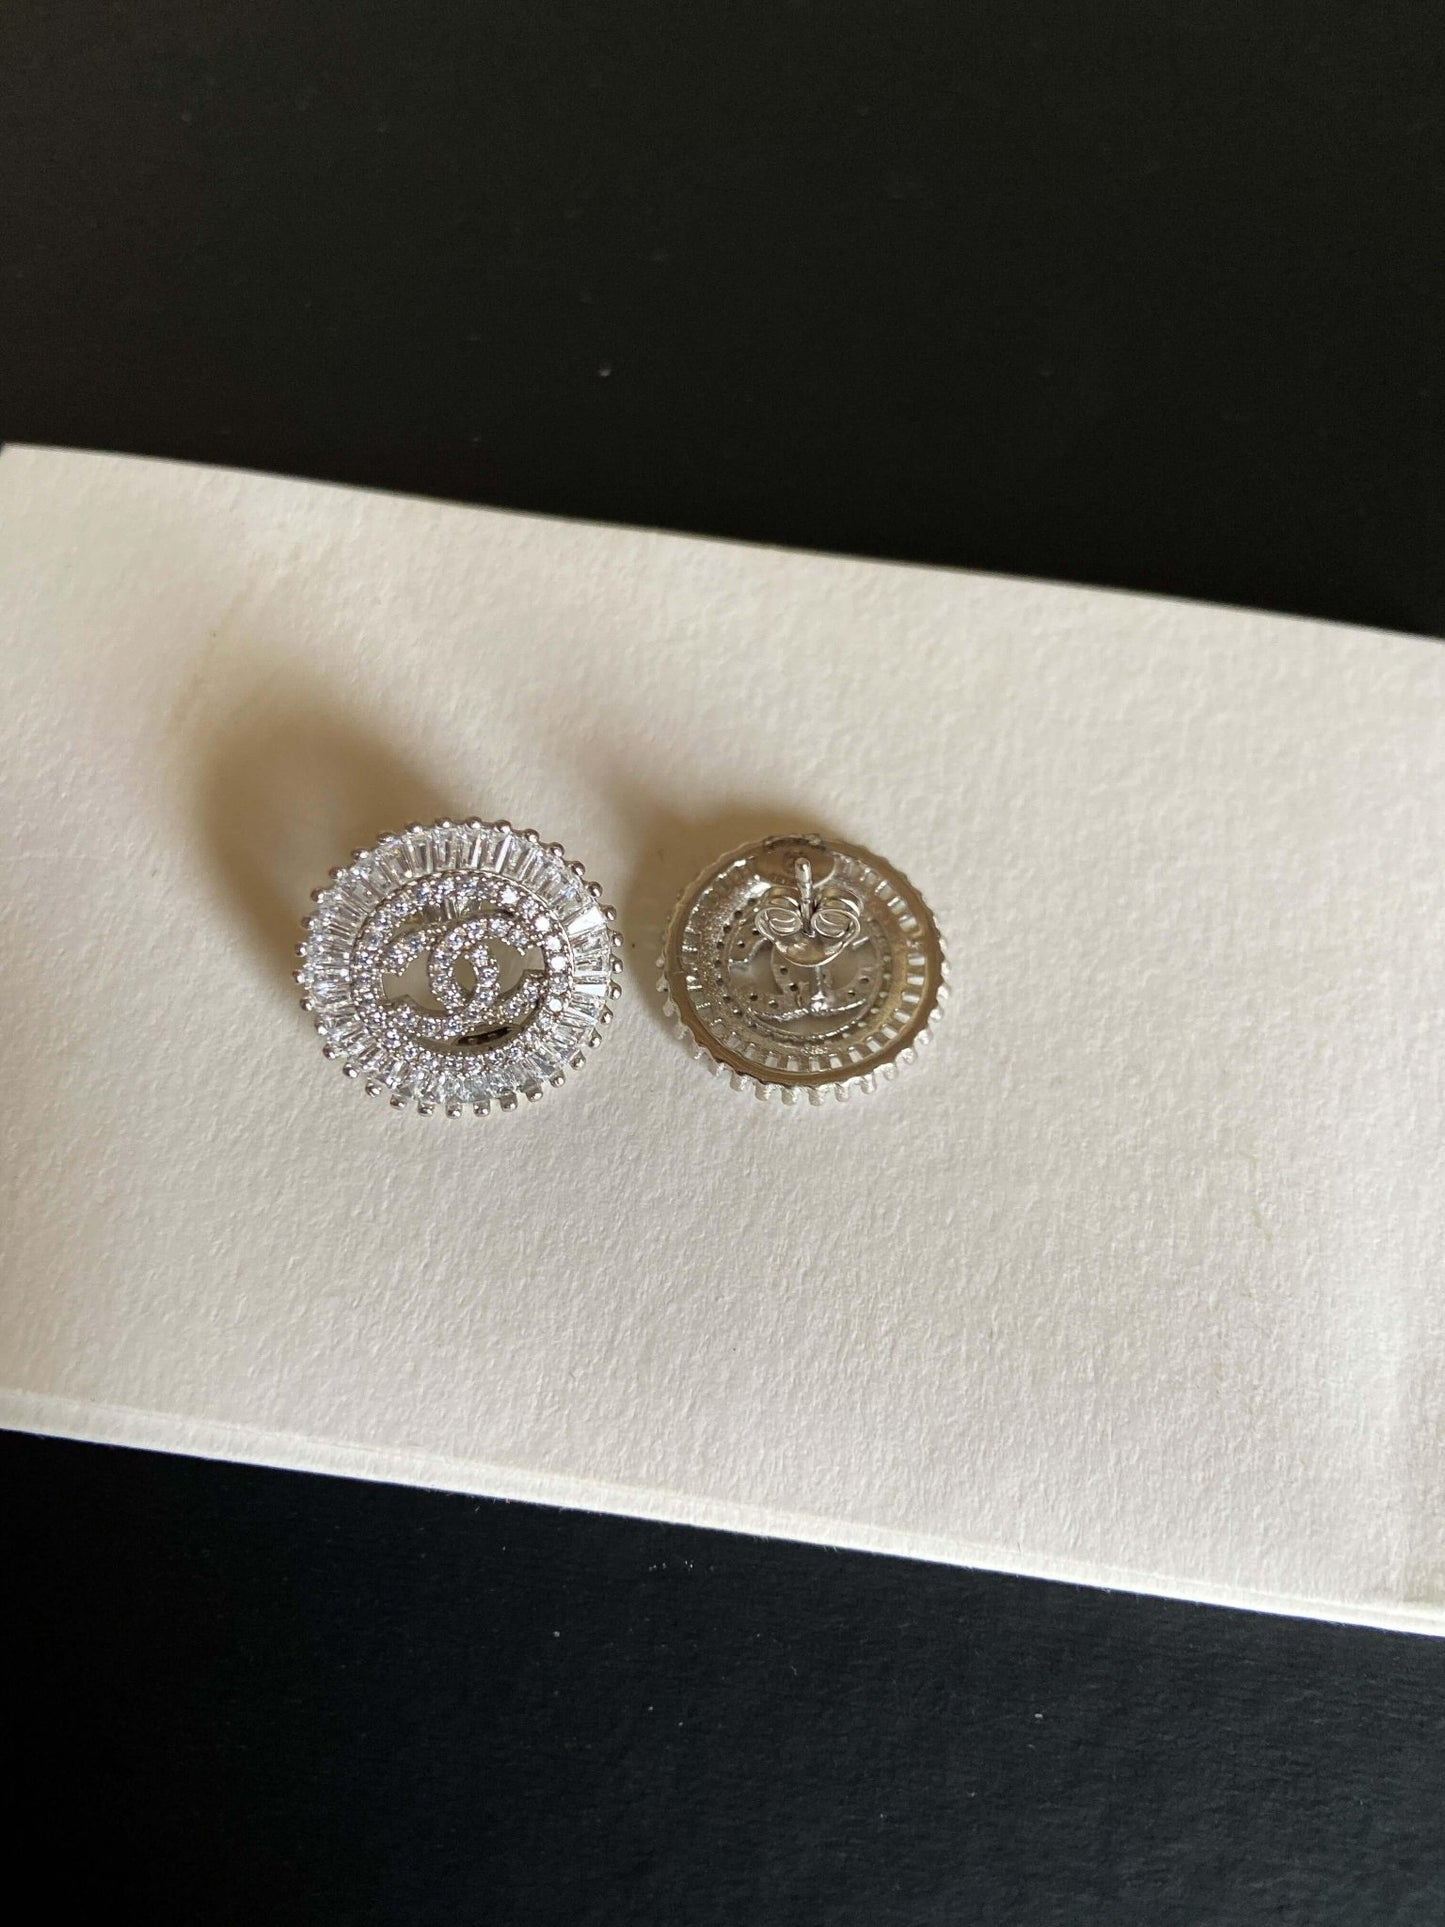 Authentic Chanel Jewelry 925 Sterling Silver Earrings - Tracesilver